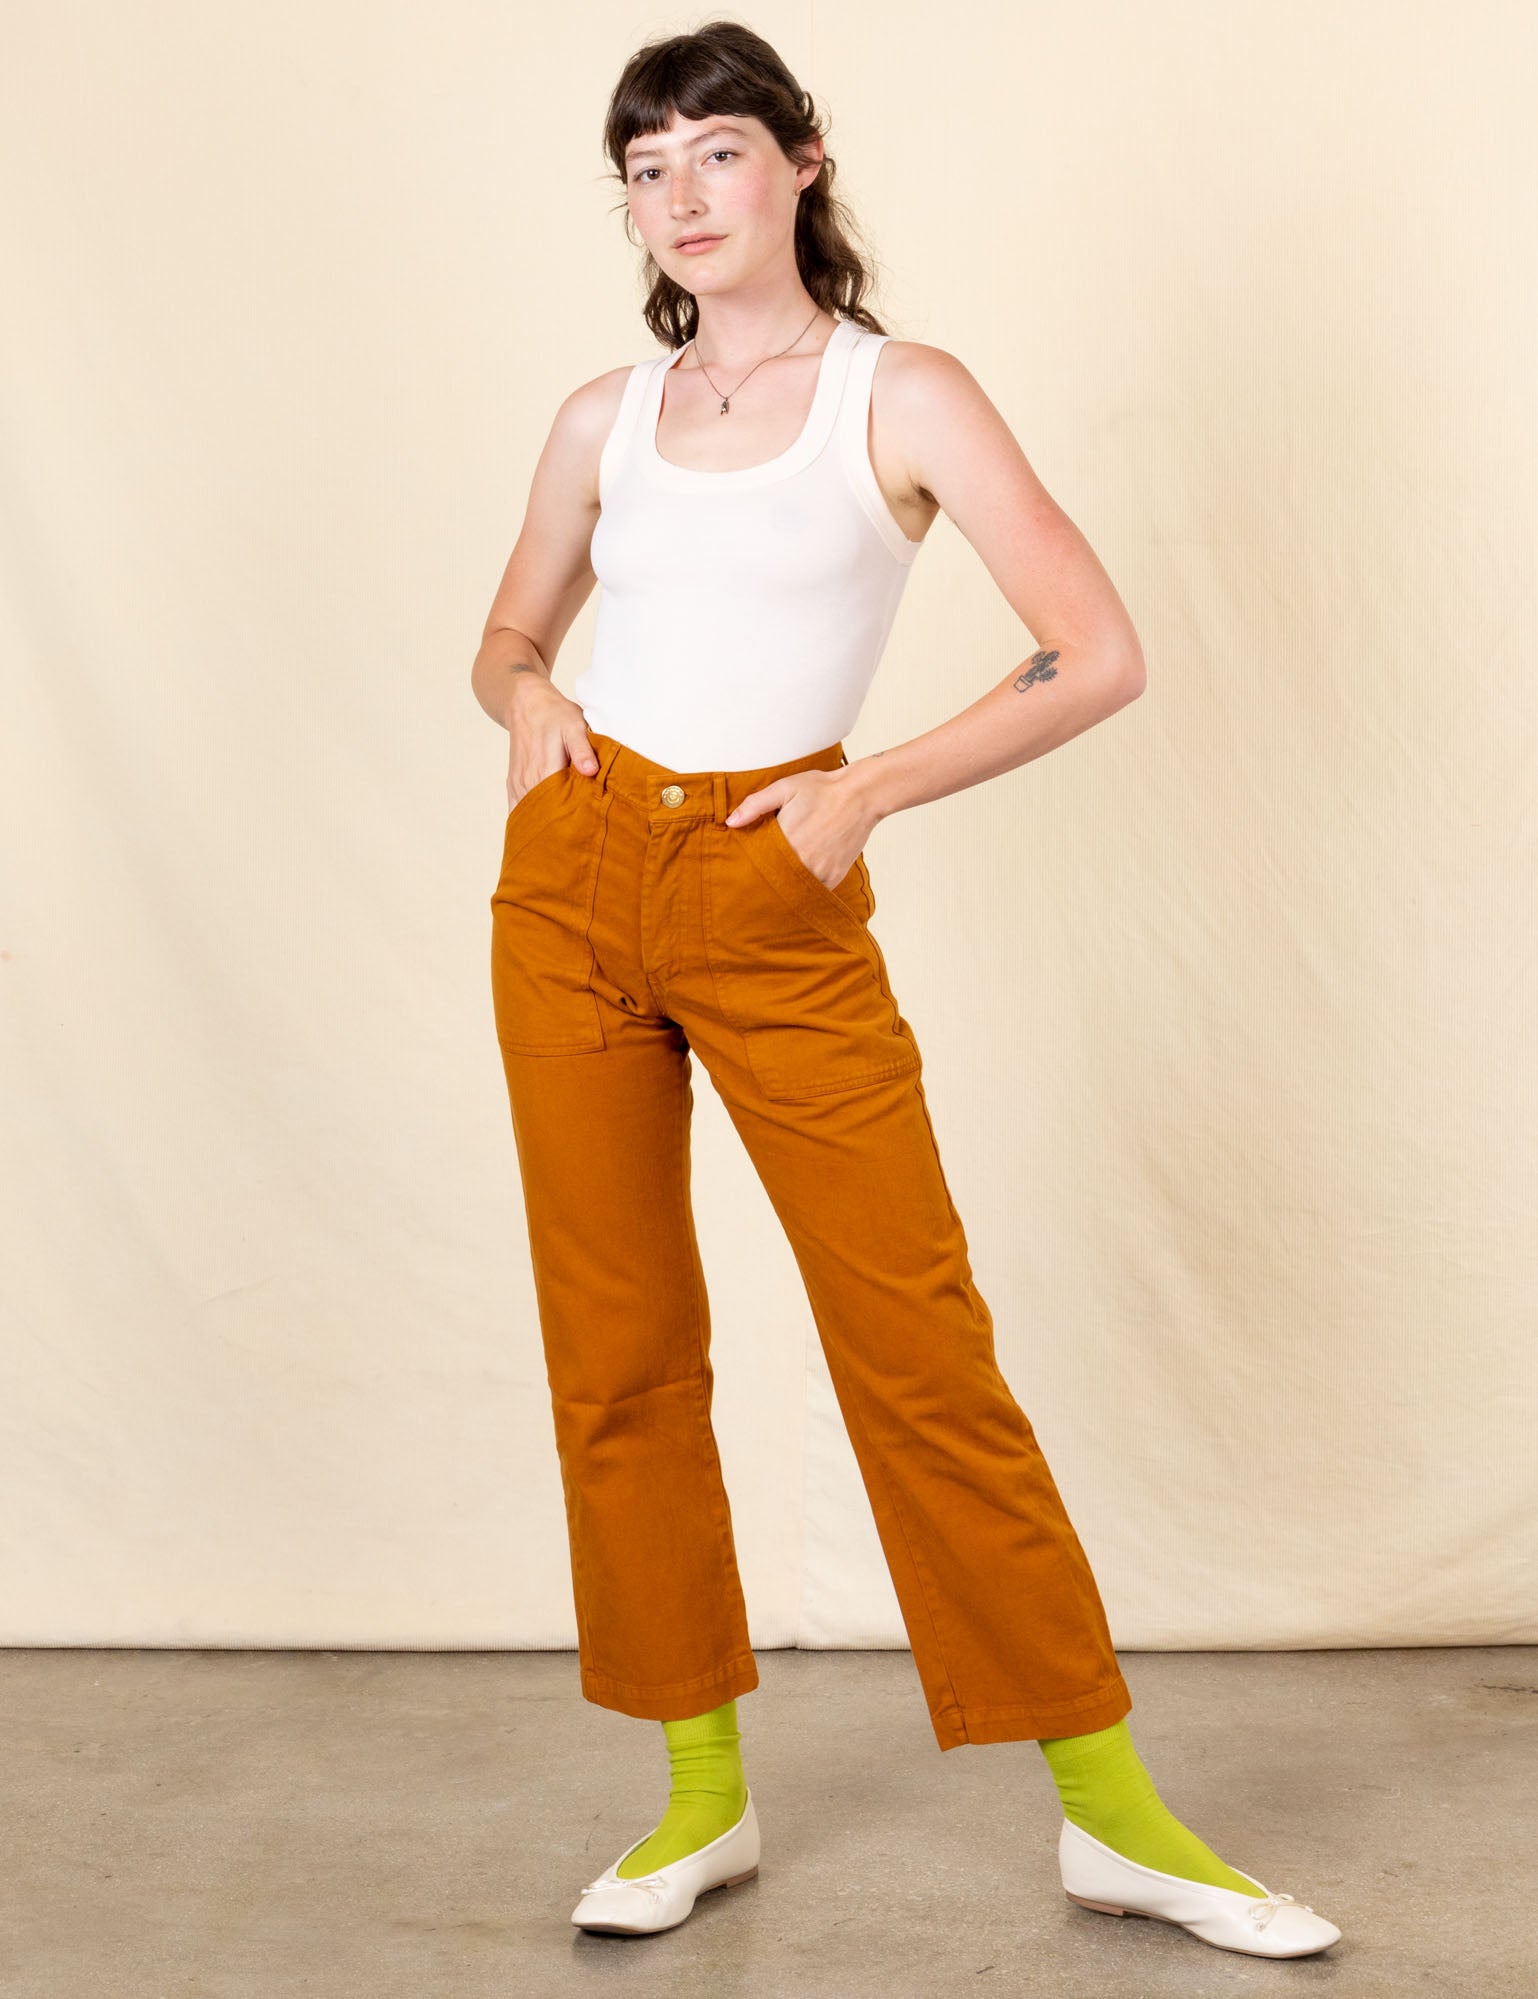 Alex is 5&#39;8&quot; and wearing XS Work Pants in Spicy Mustard paired vintage off-white Tank Top